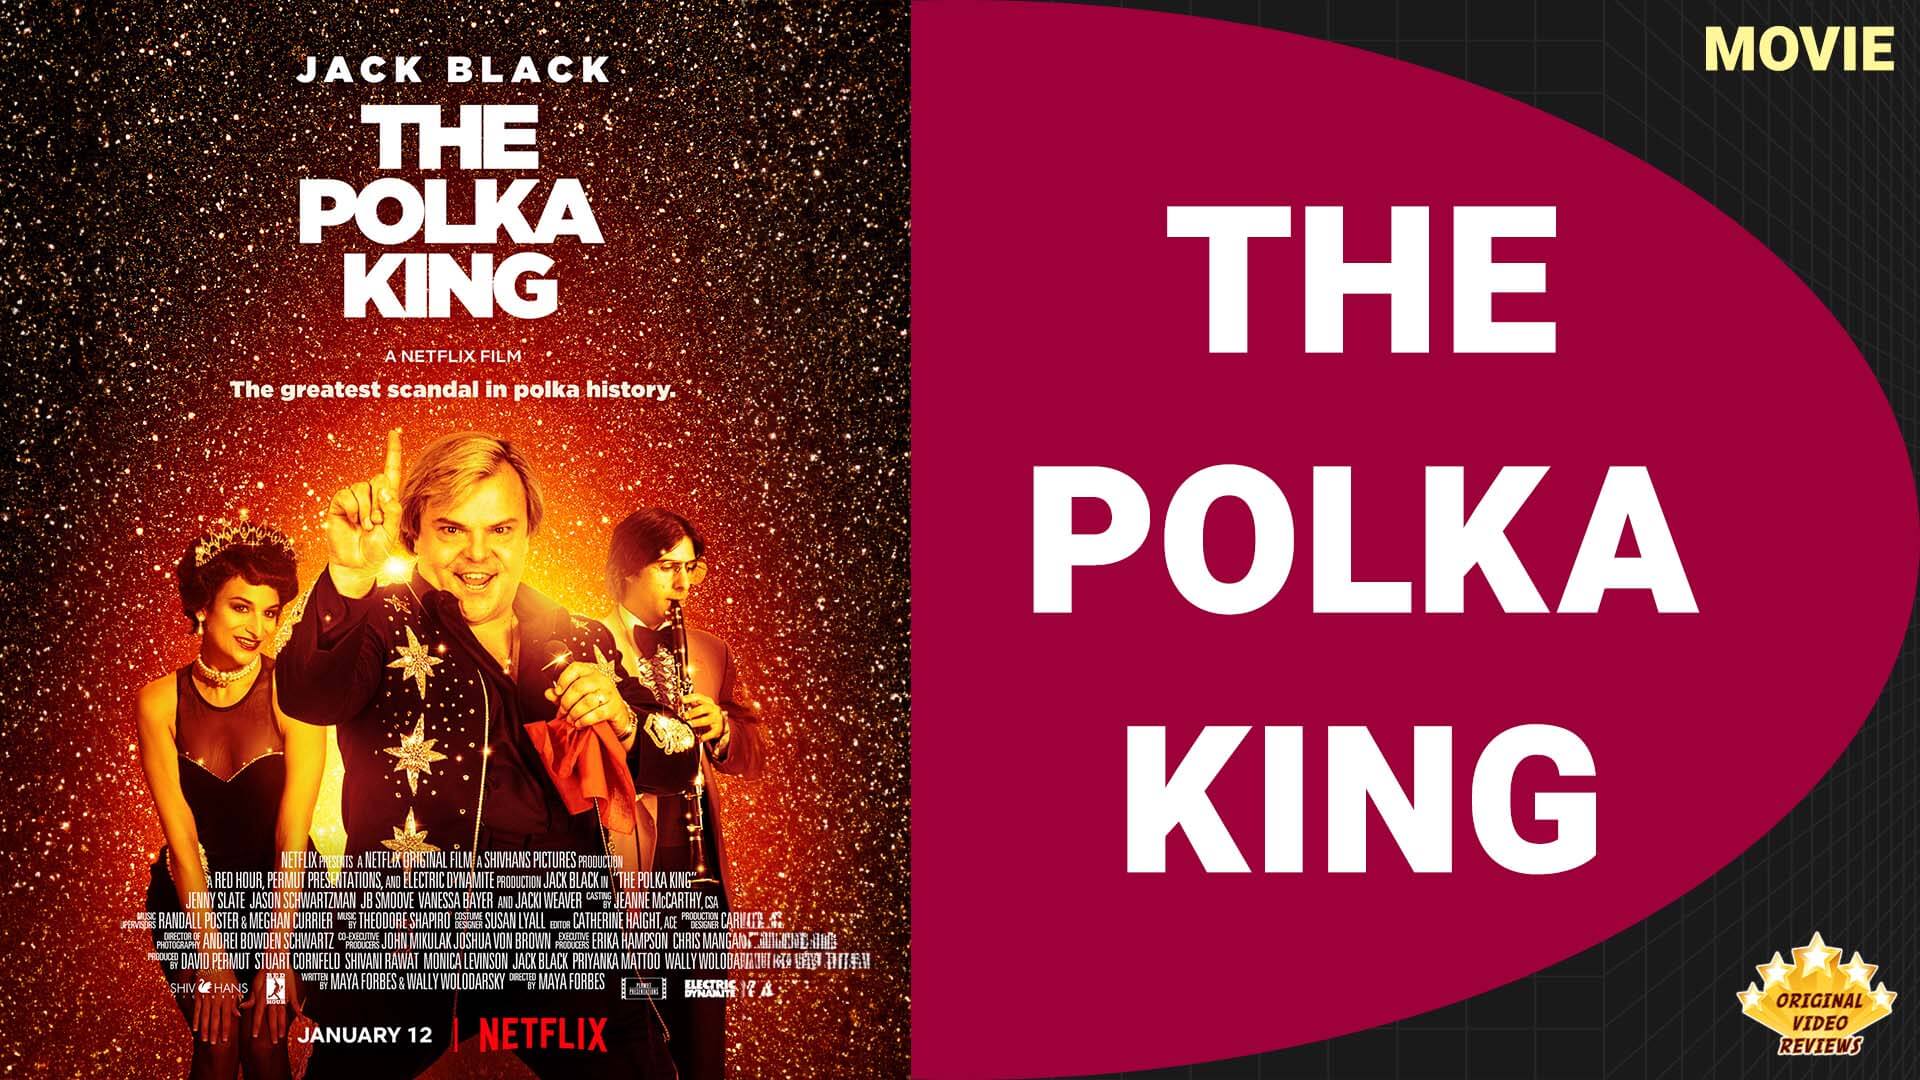 The Polka King Netflix Movie Review